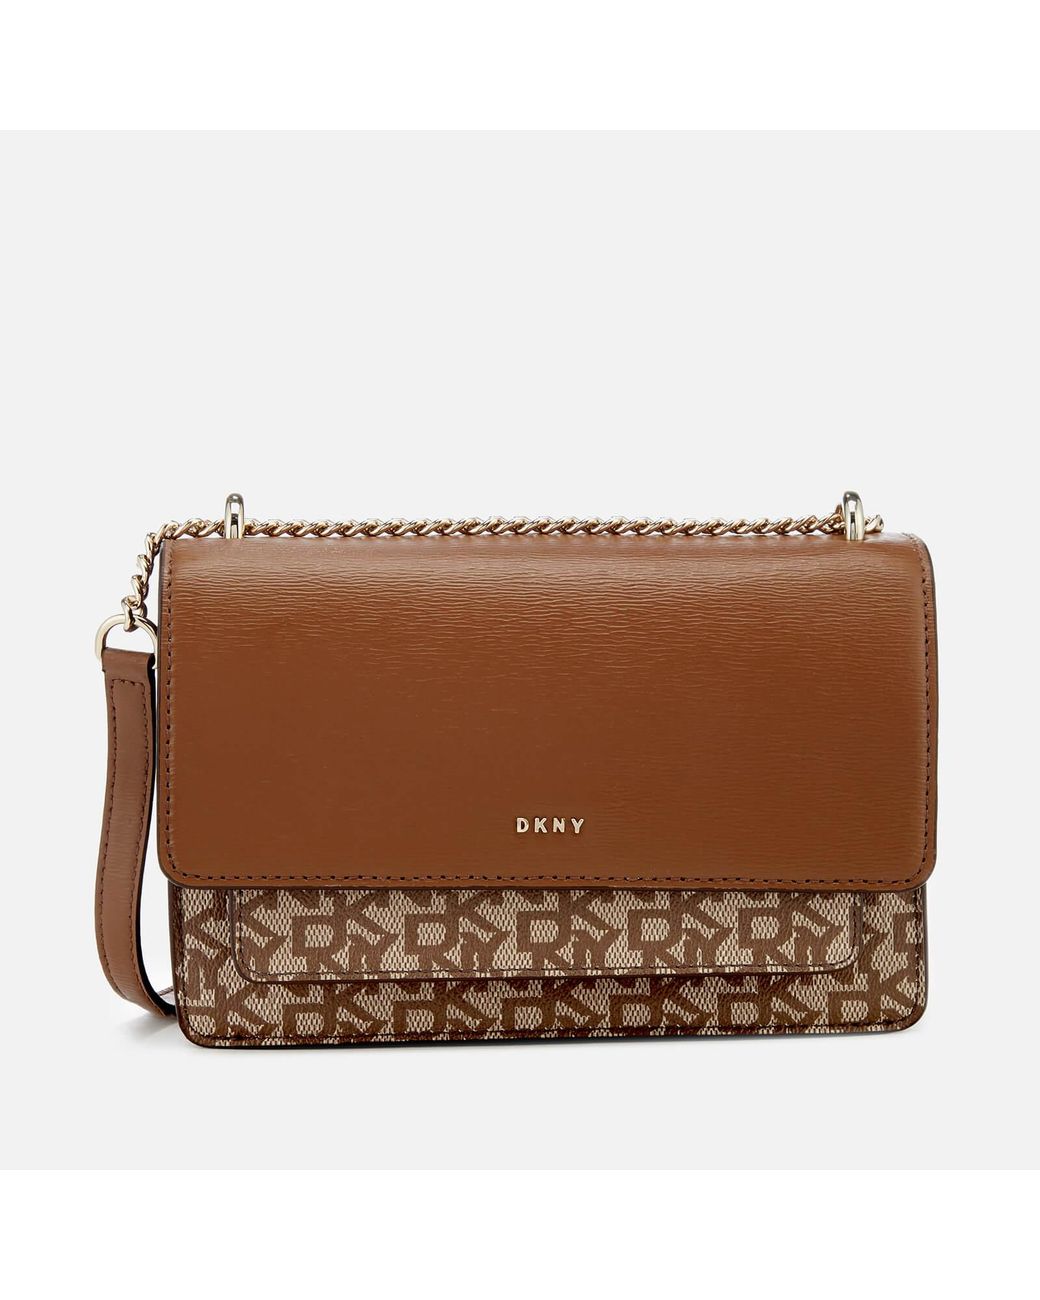 DKNY Logo Leather Small Cross-body Bag in Brown